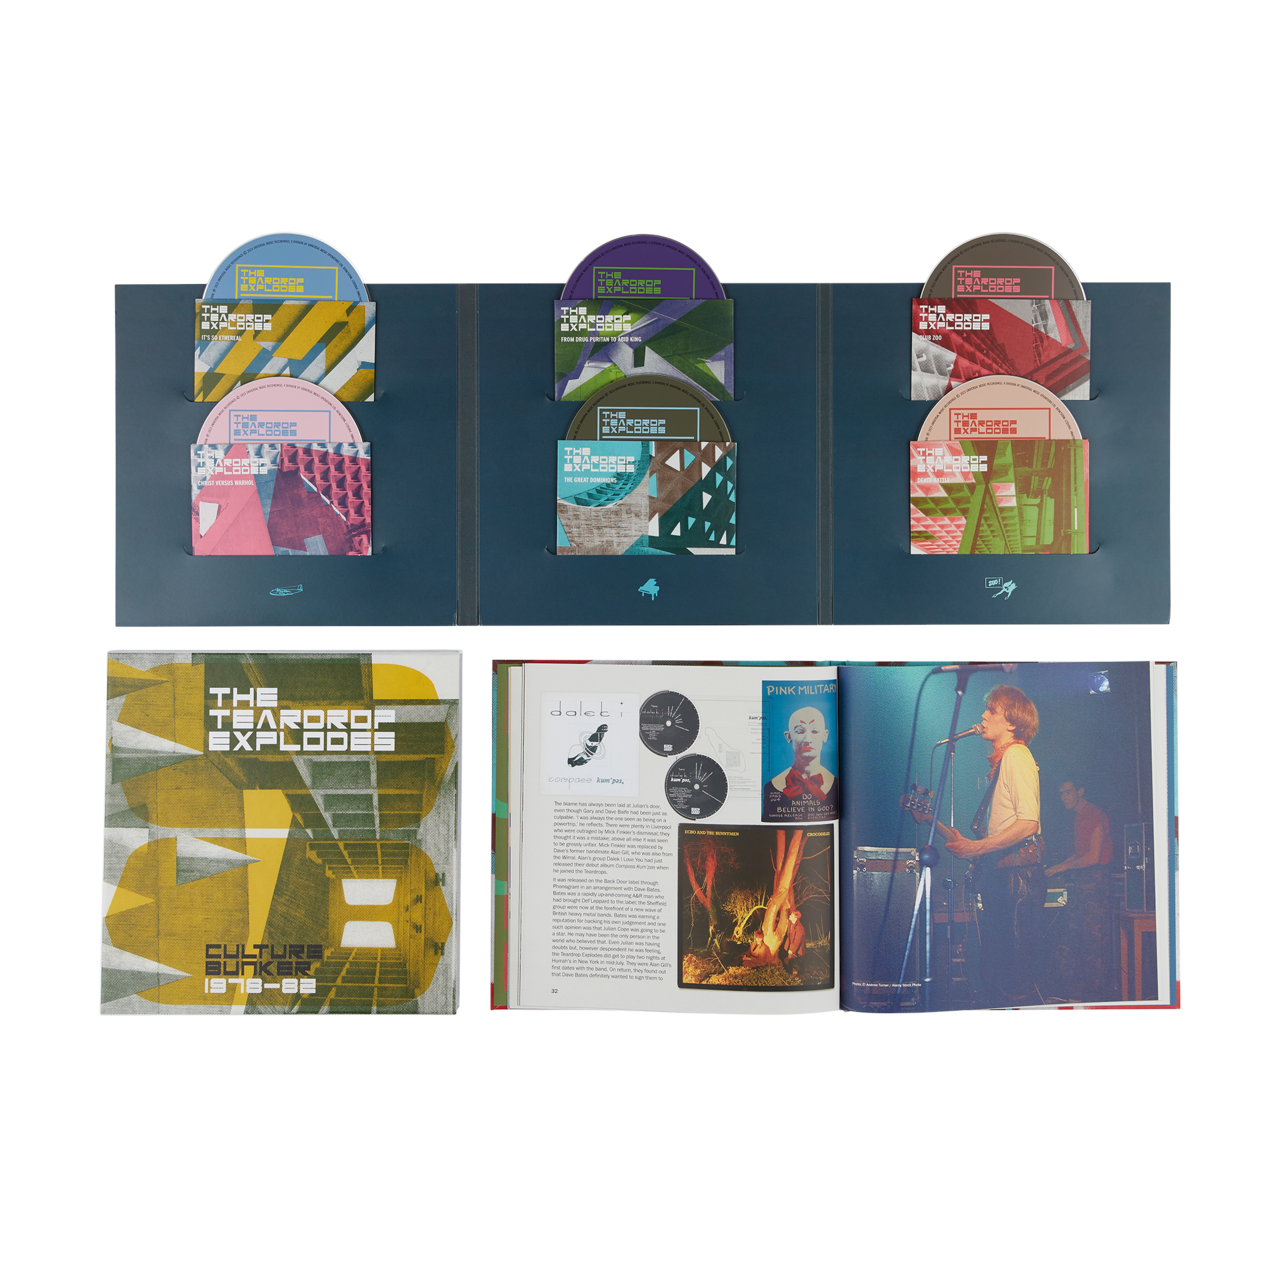 The Teardrop Explodes - The Culture Bunker: Exclusive 6CD Box Set